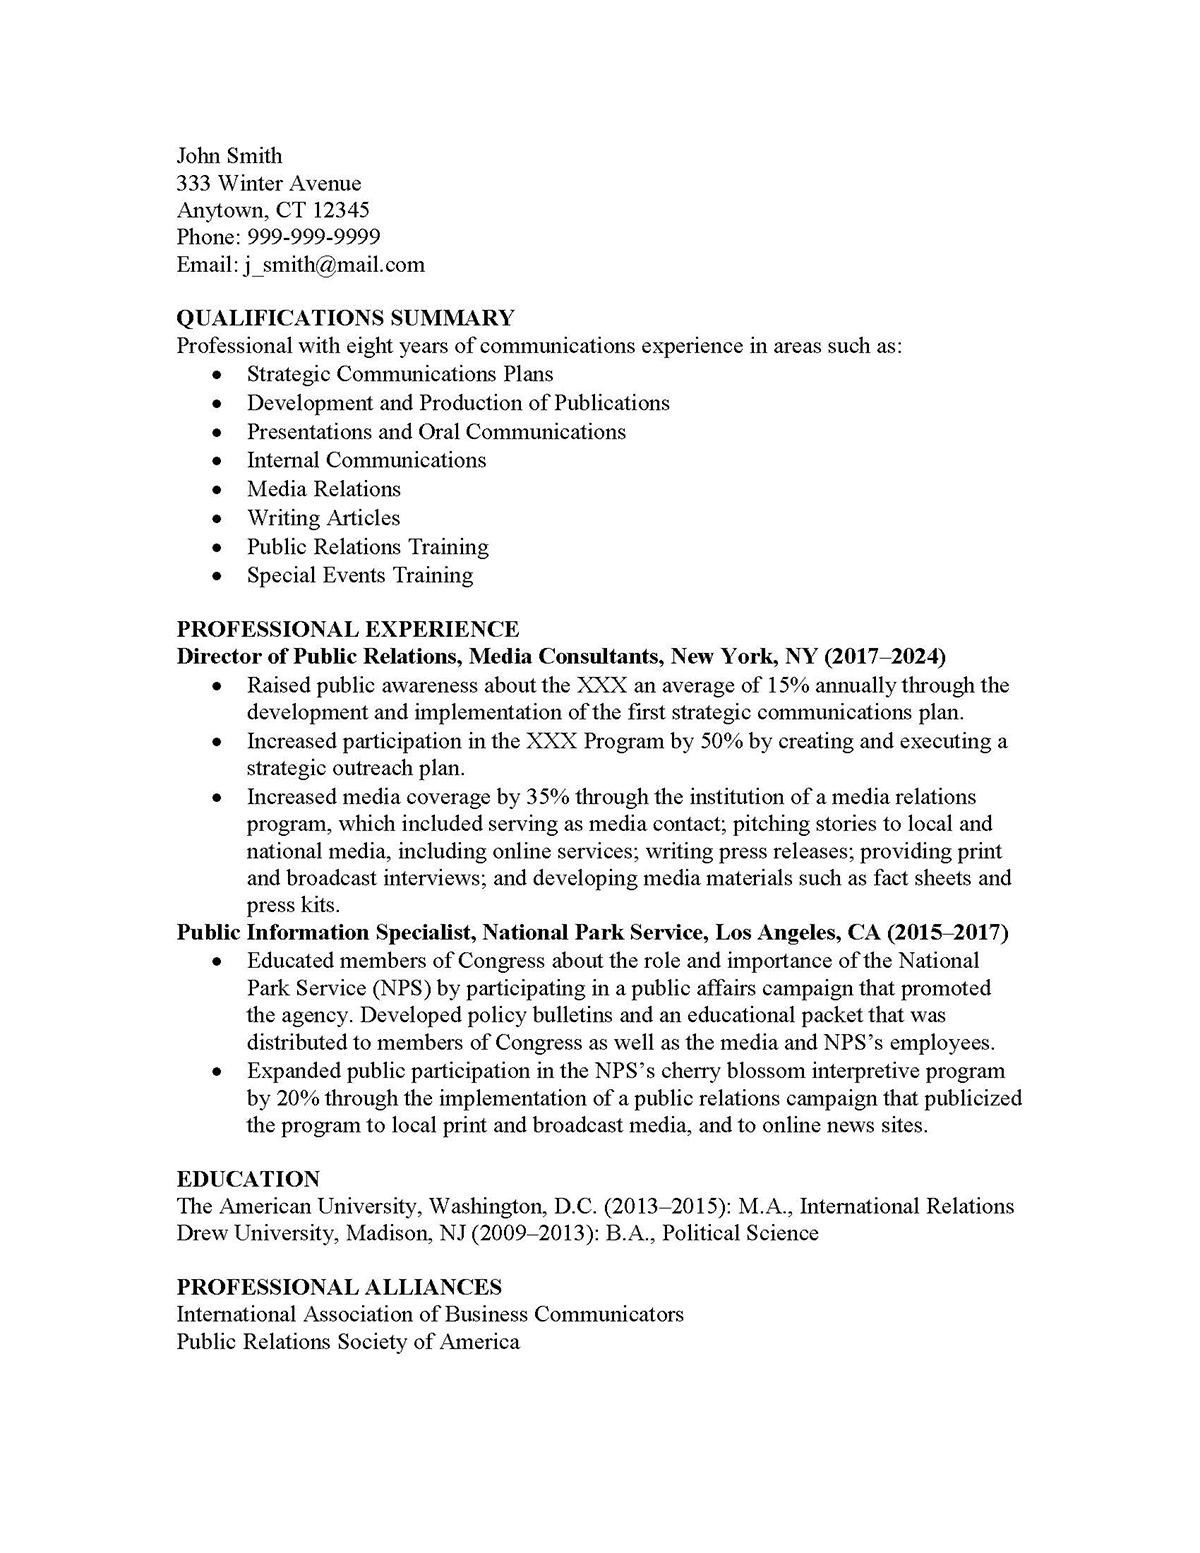 Sample resume: Public Relations, High Experience, Combination